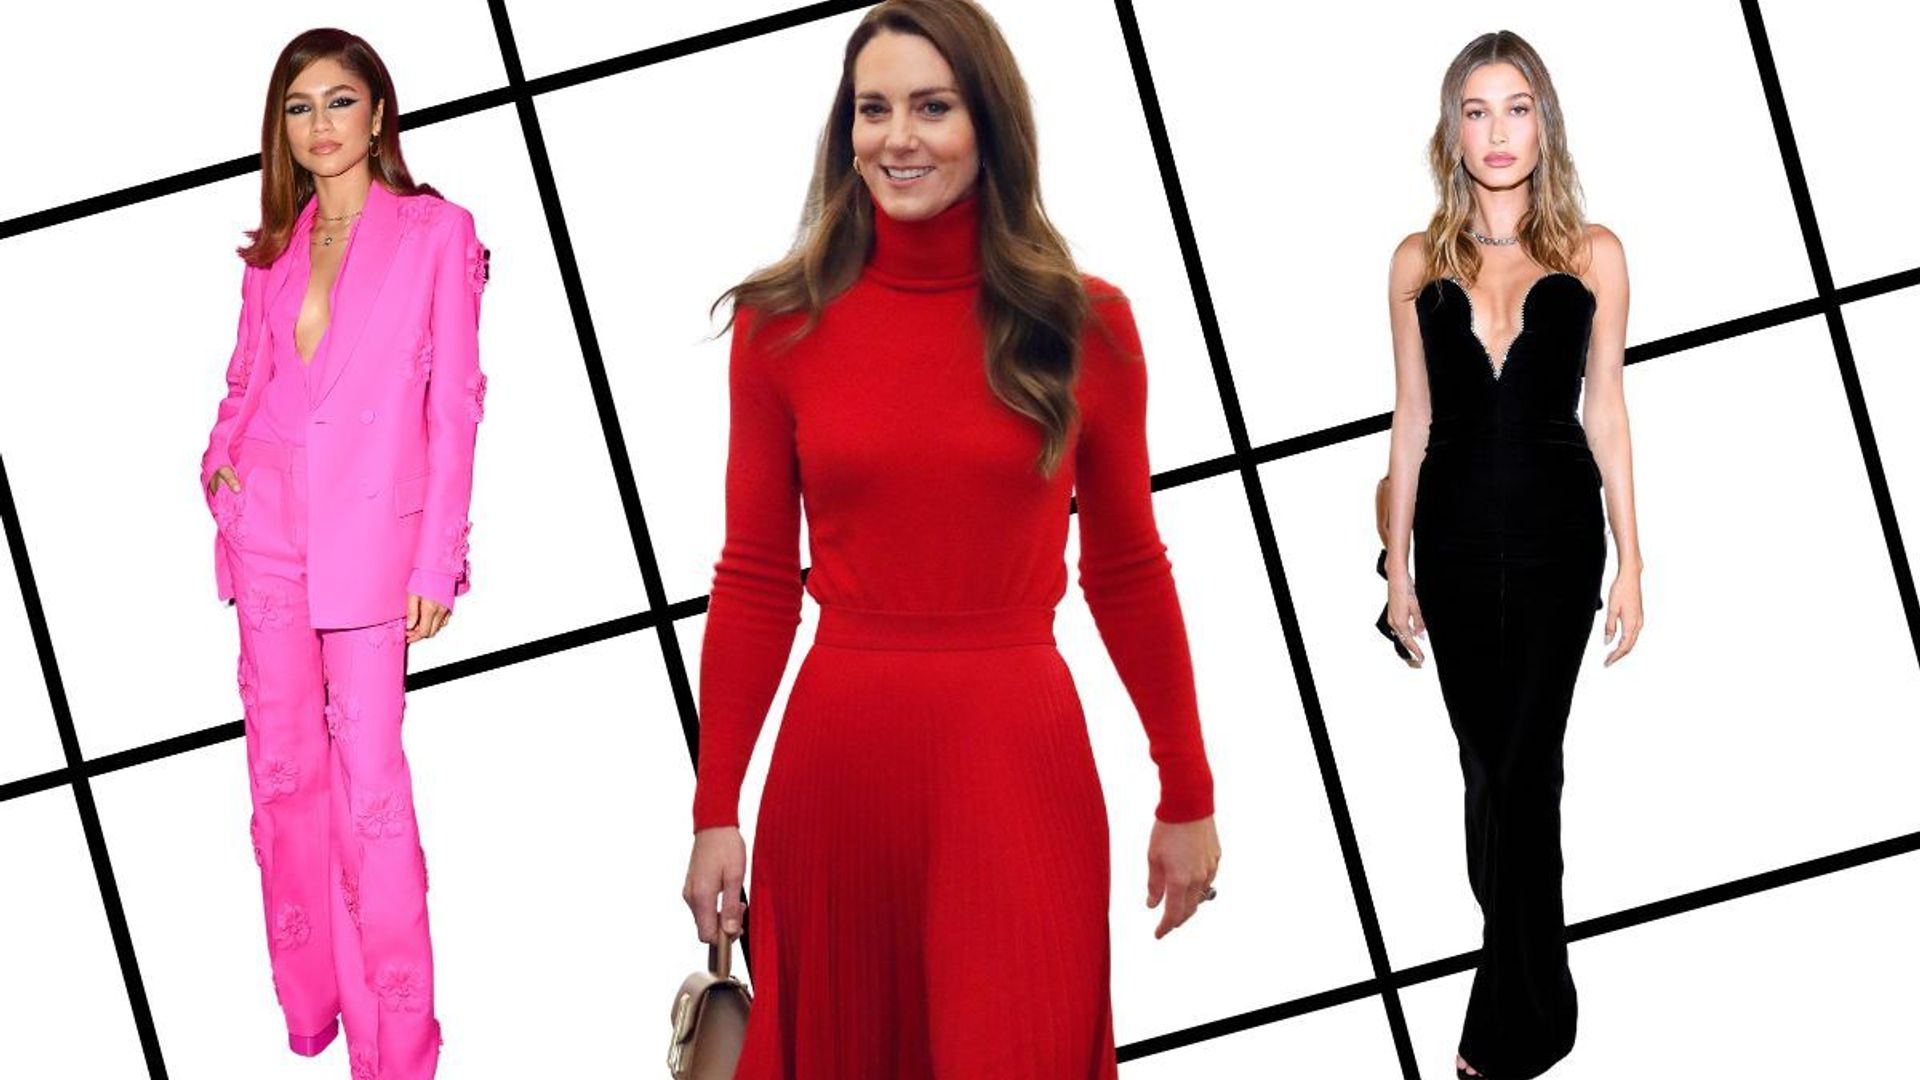 The 15 women with the most influential style in the world might surprise you